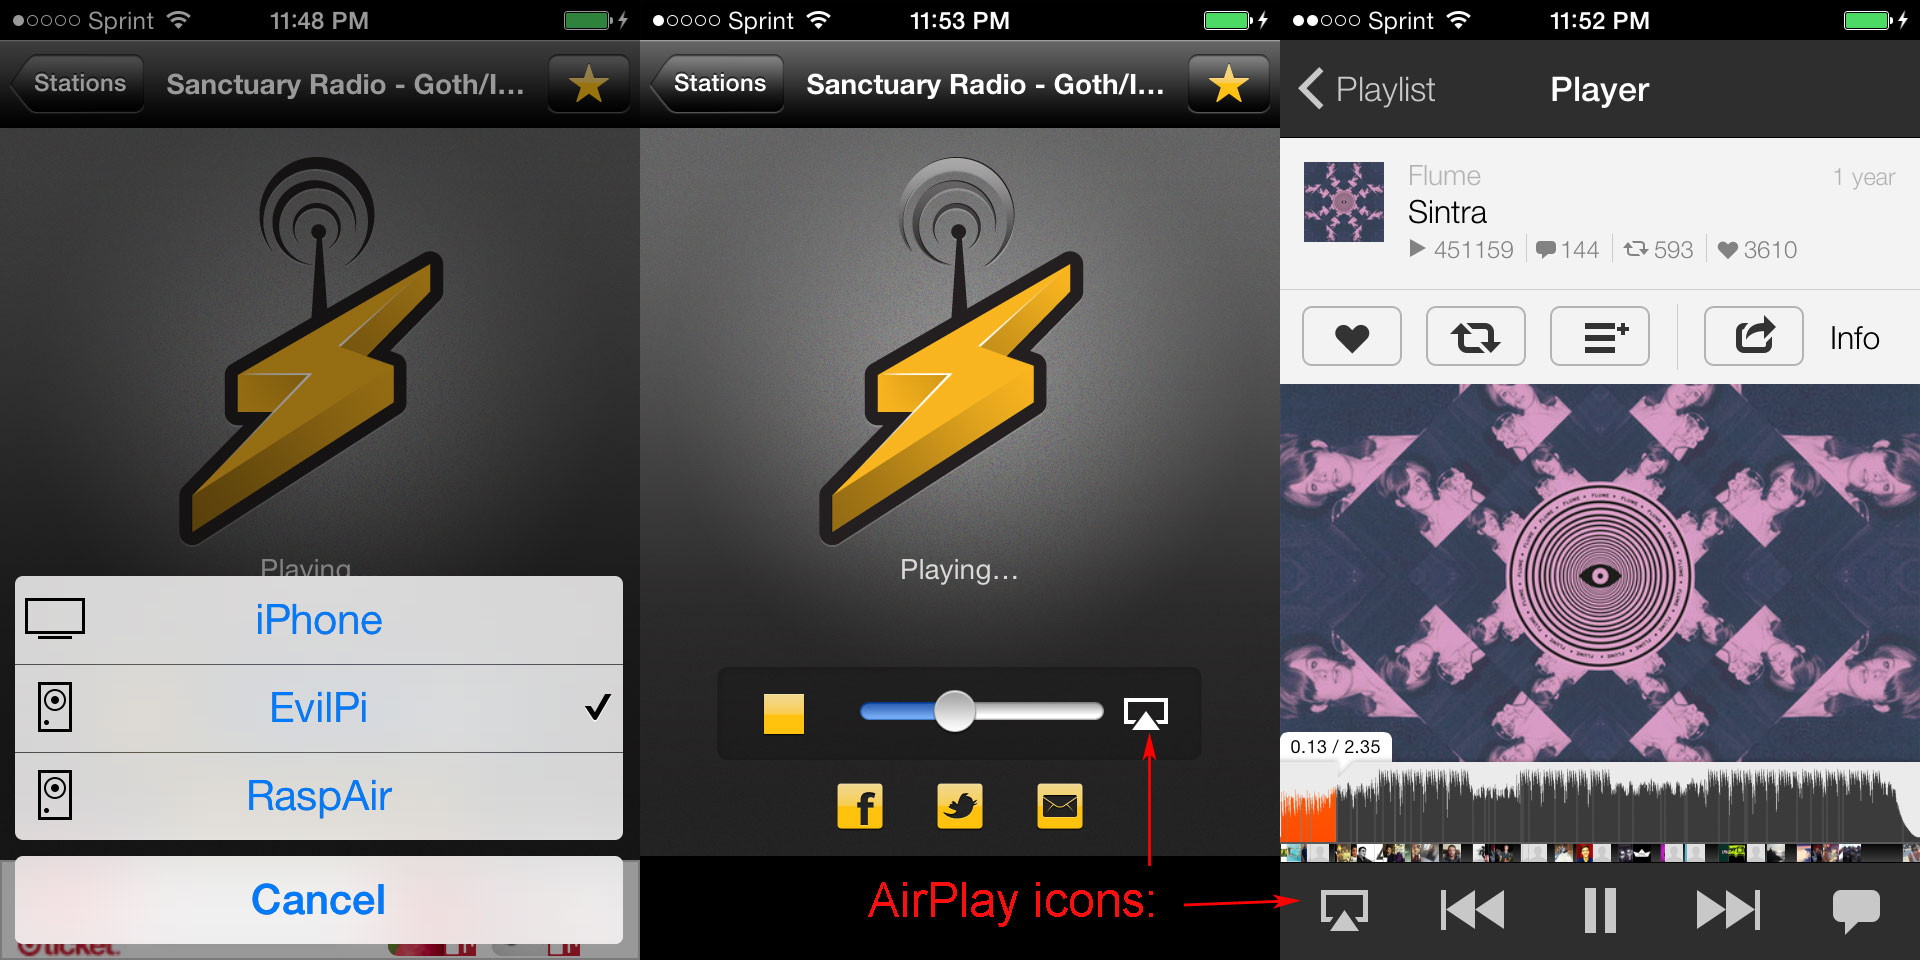 AirPlay icon location on IOS7